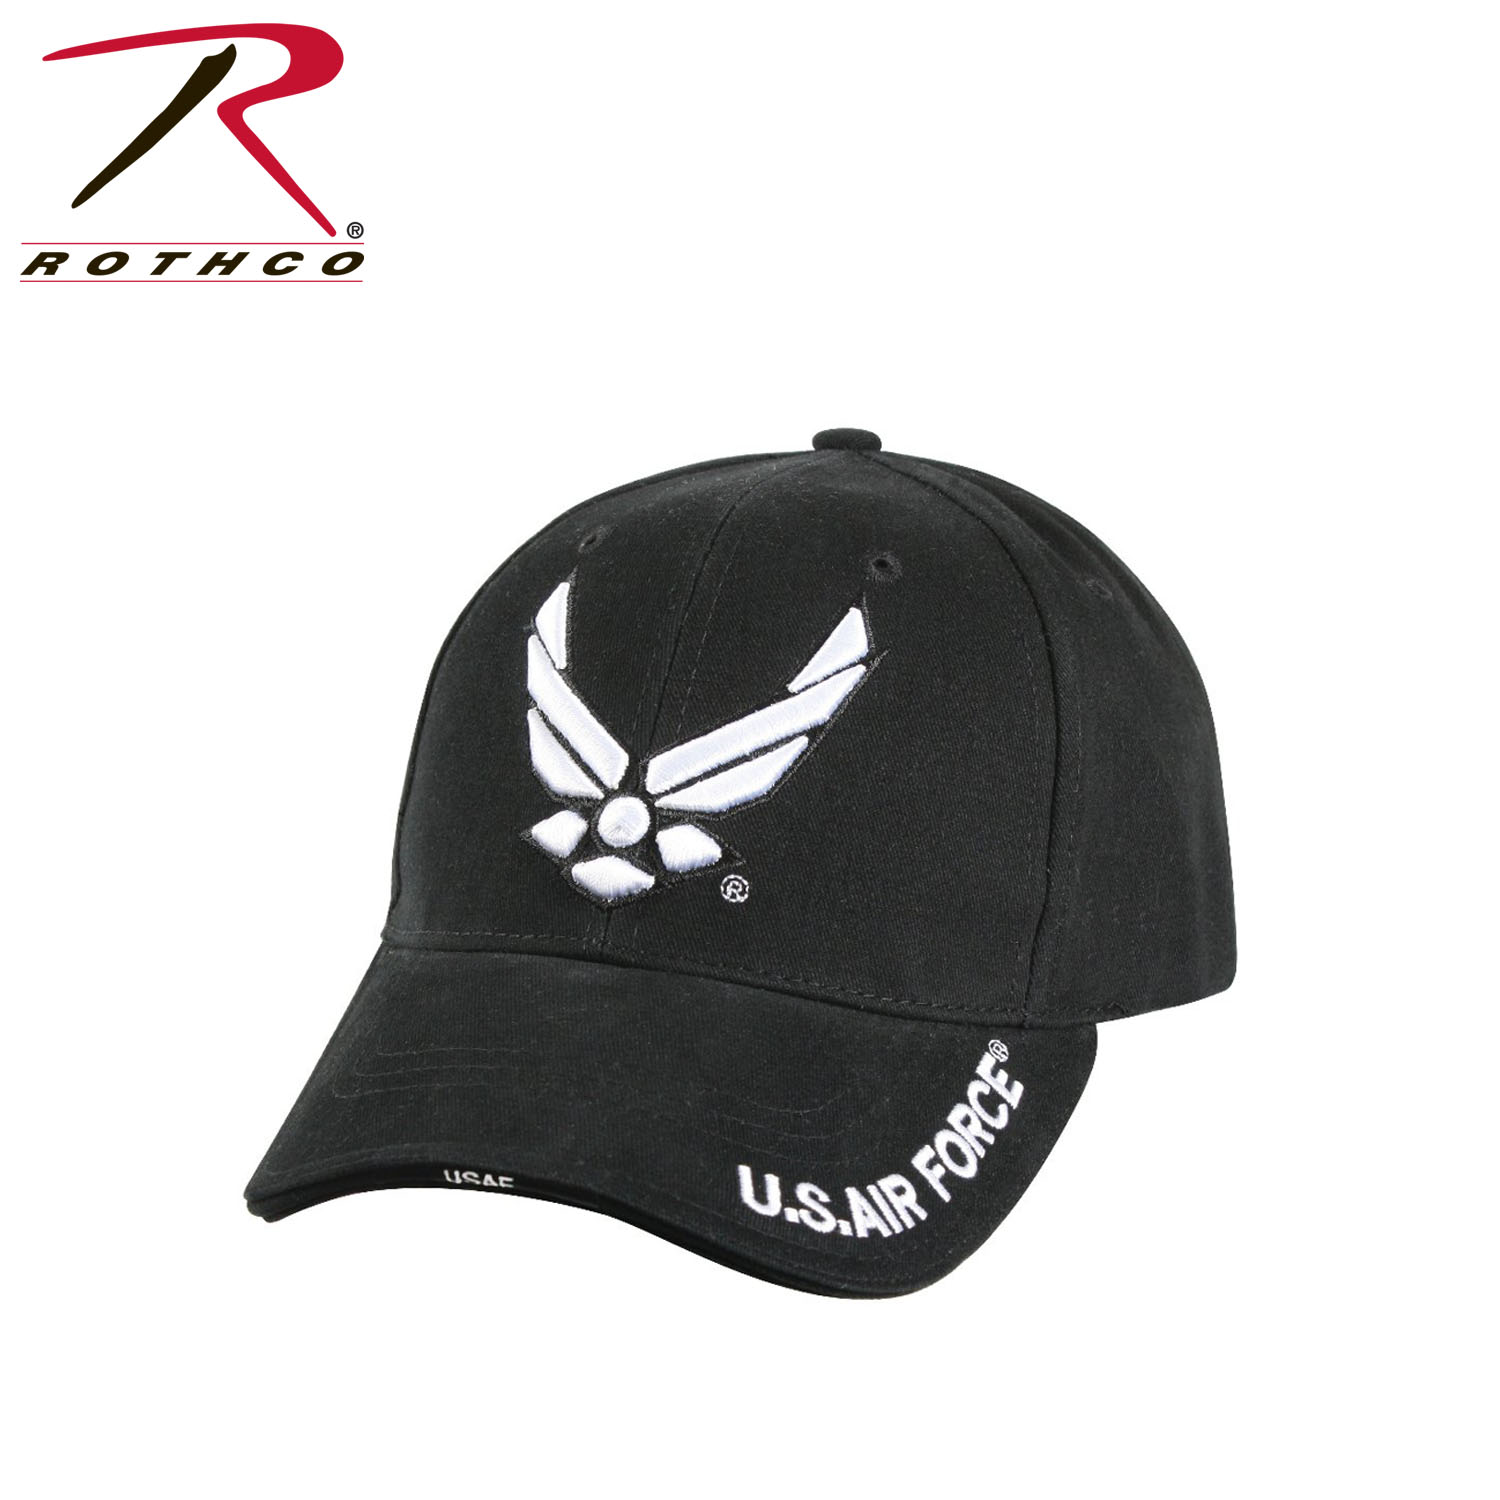 CASQUETTE U.S. DELUXE VINTAGE - ROTHCO - BLACK WING